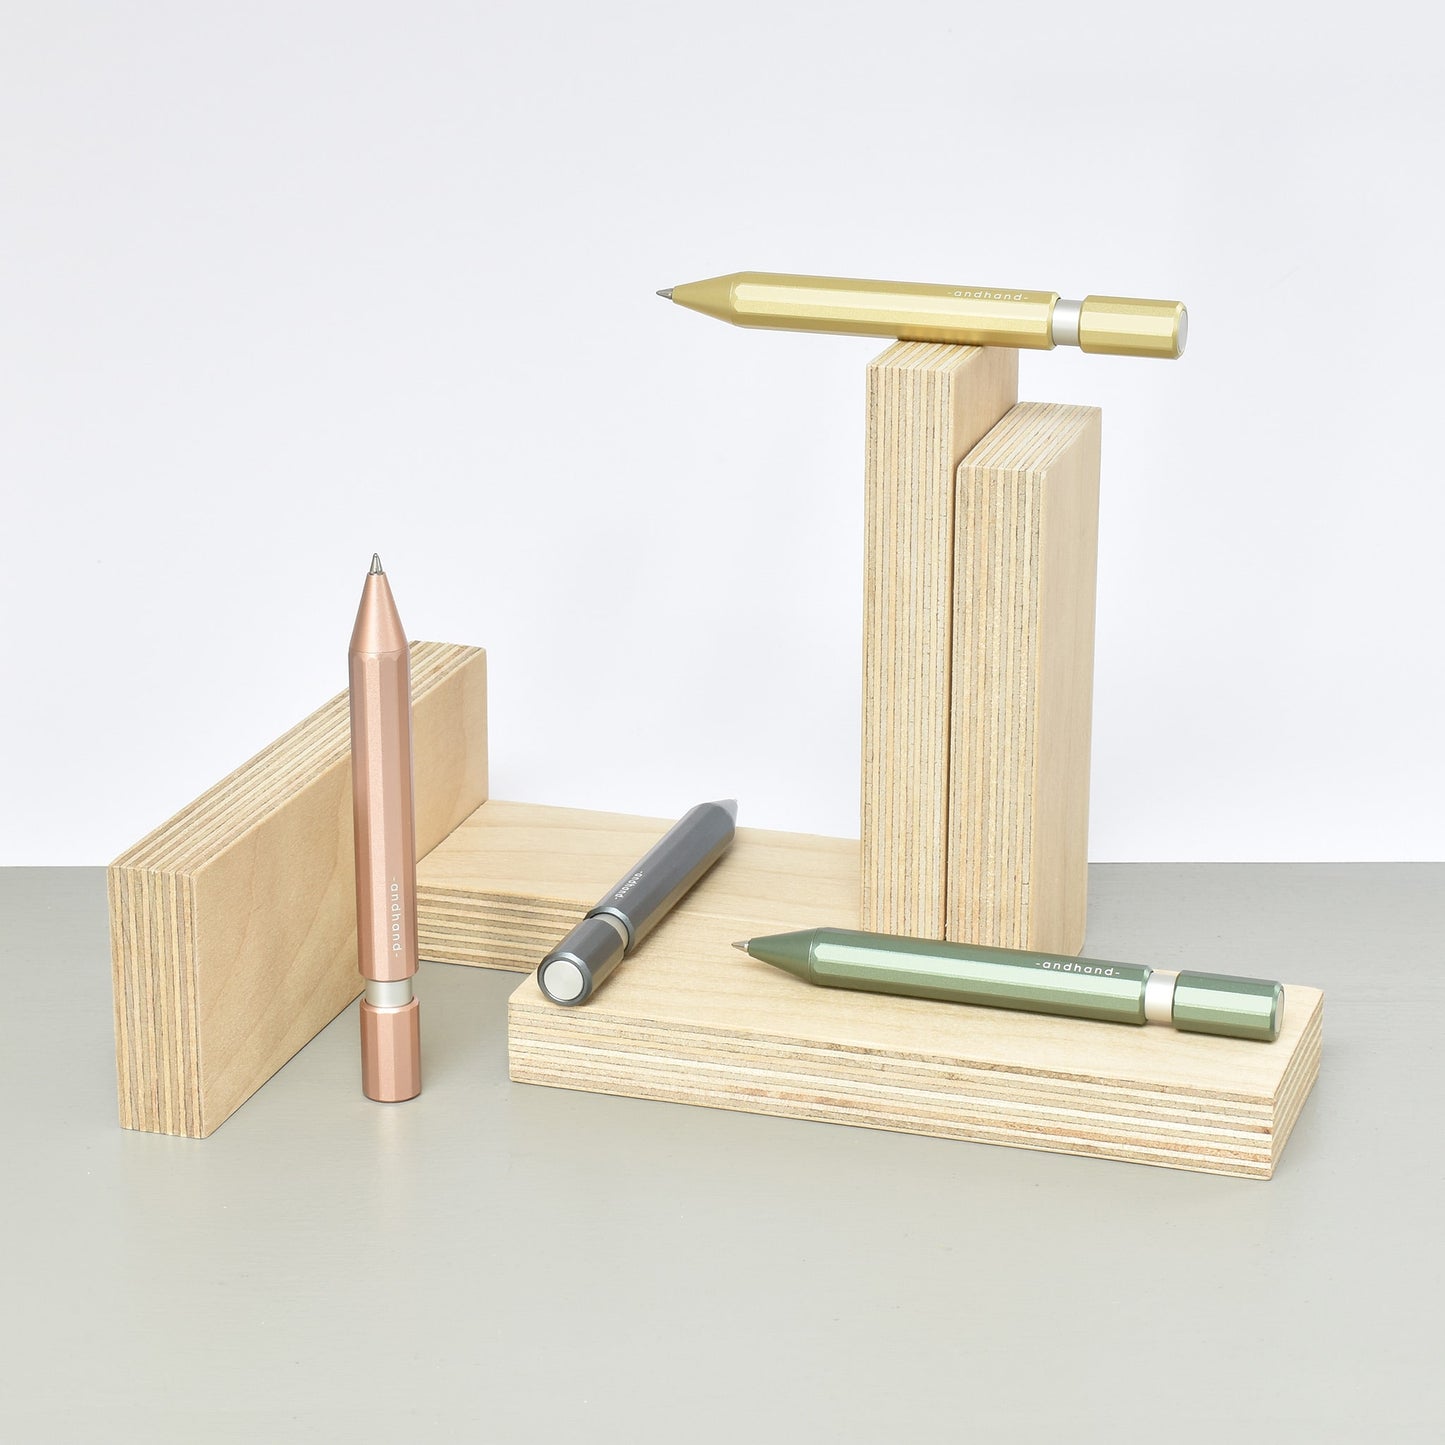 Aspect retractable pen available in forest green, blush pink, gold lustre and slate grey anodized finishes.